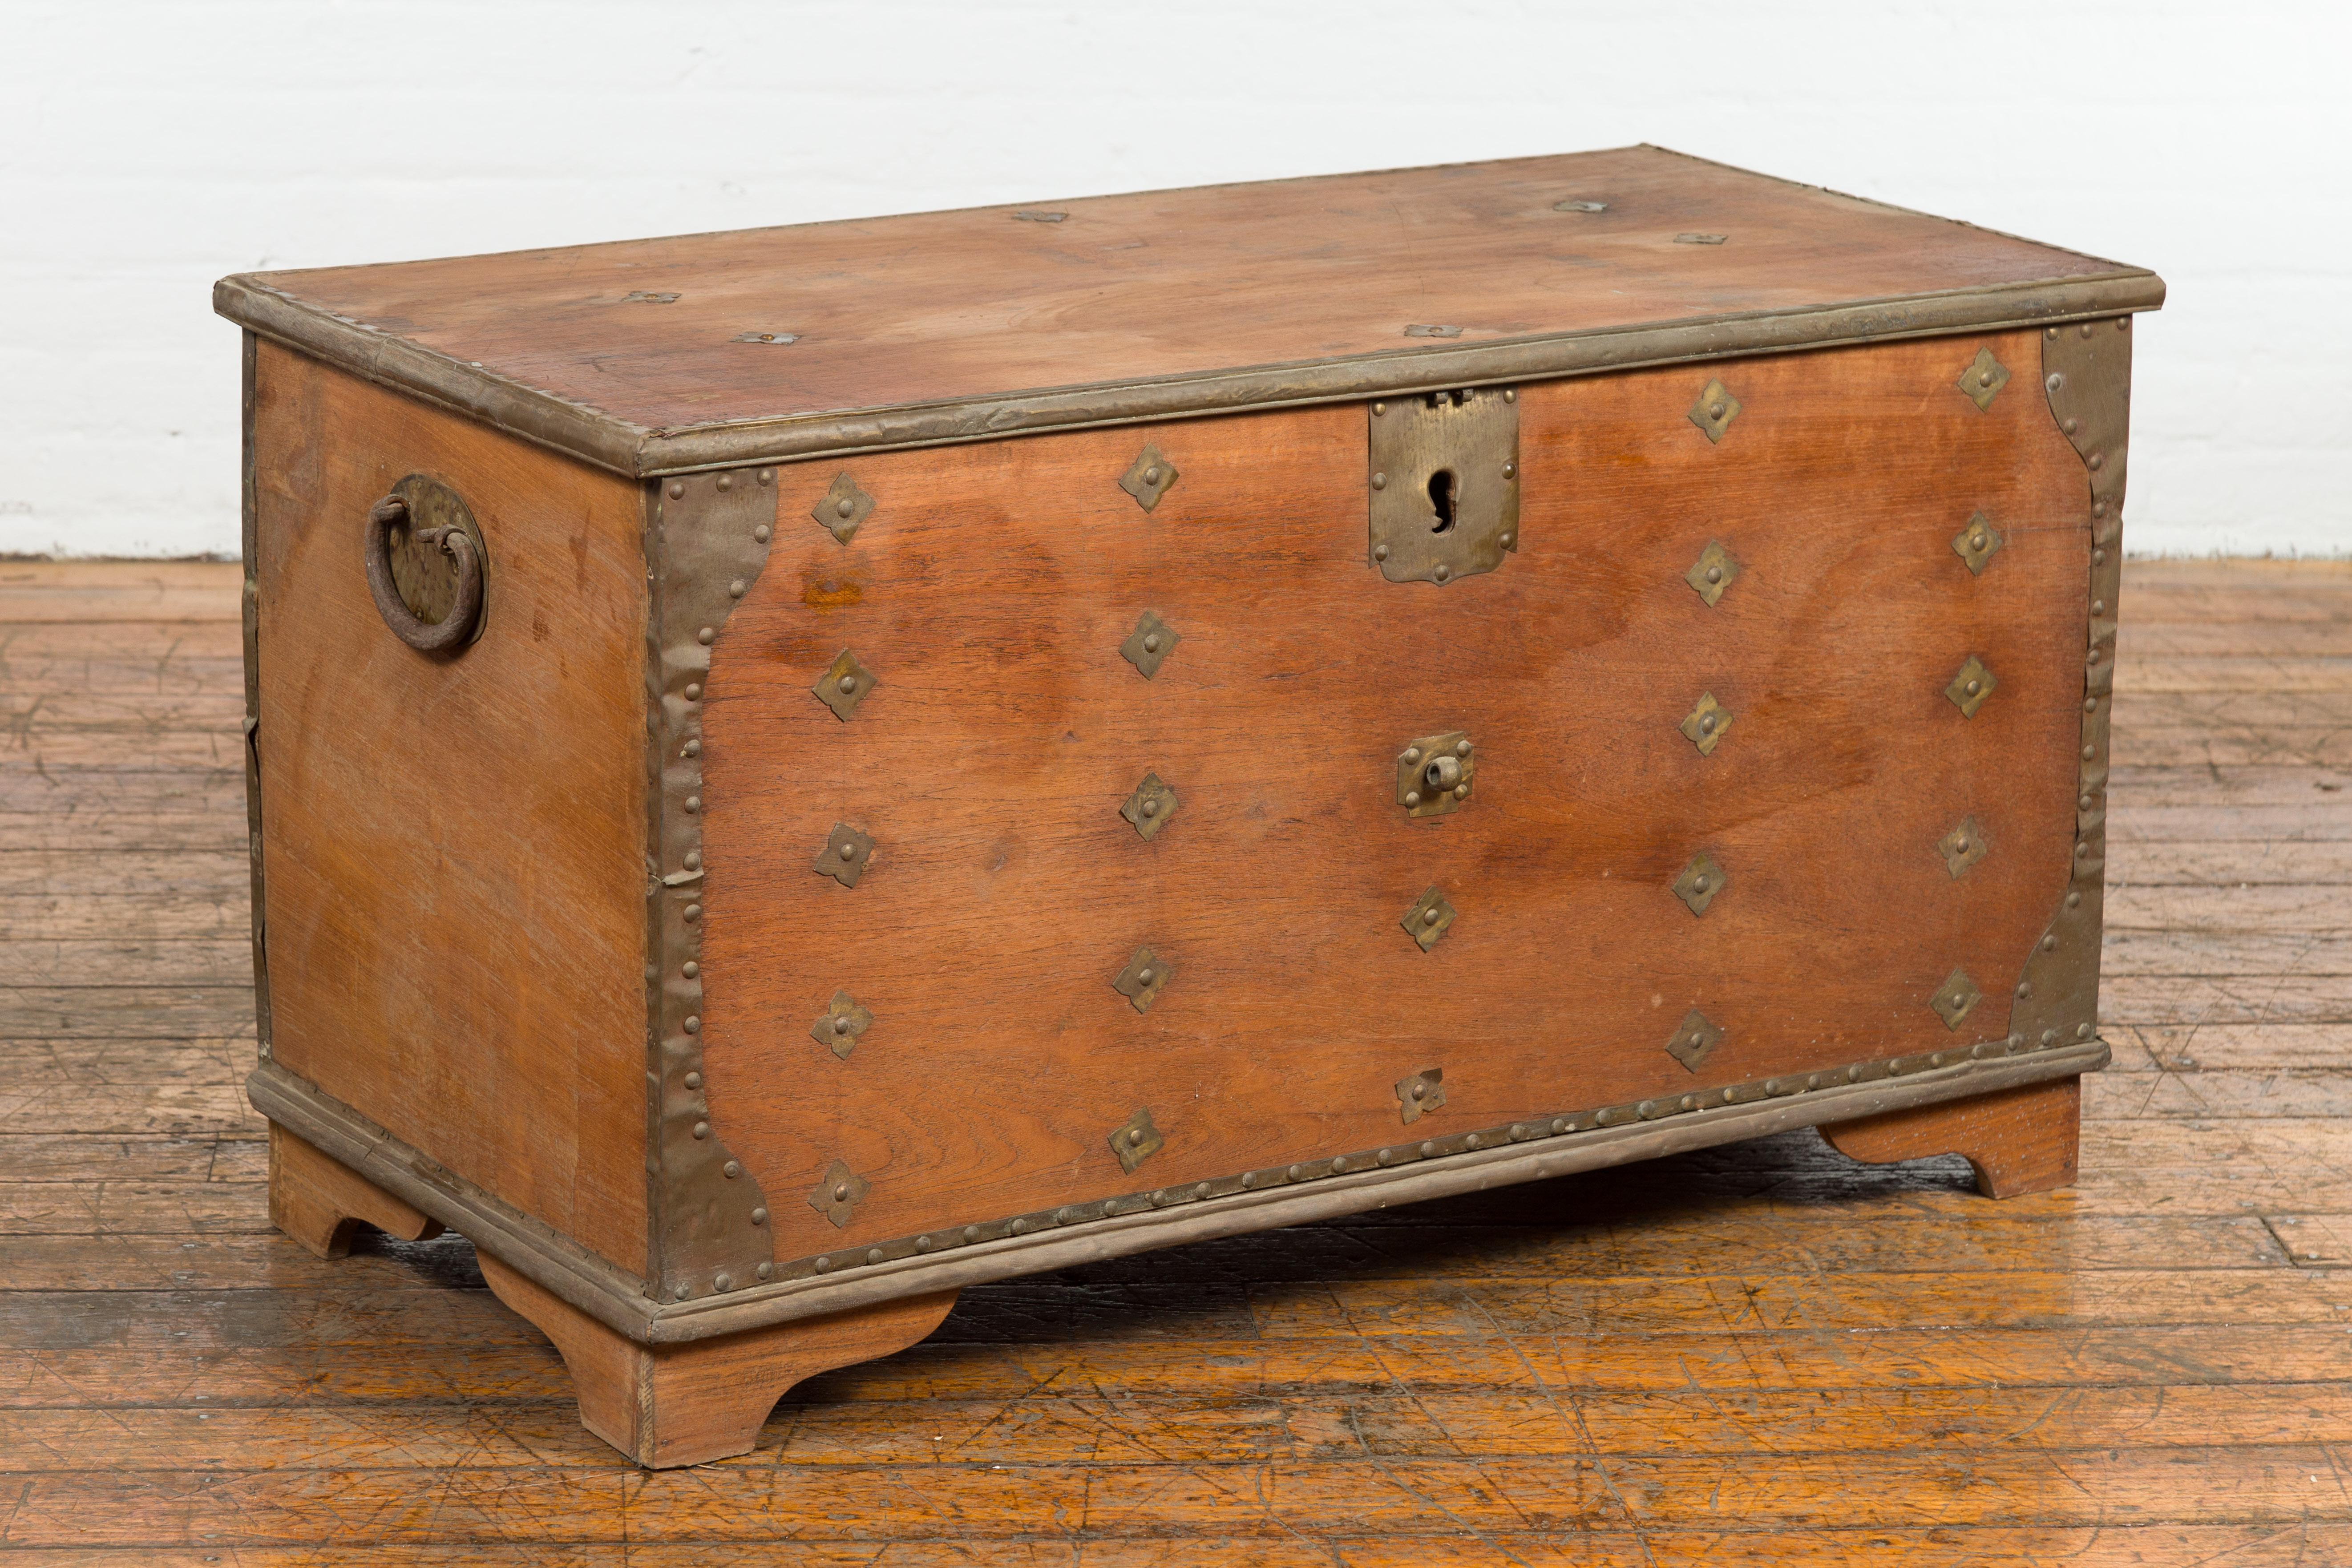 Rustic Indonesian 19th Century Wooden Blanket Chest with Brass Accents For Sale 10